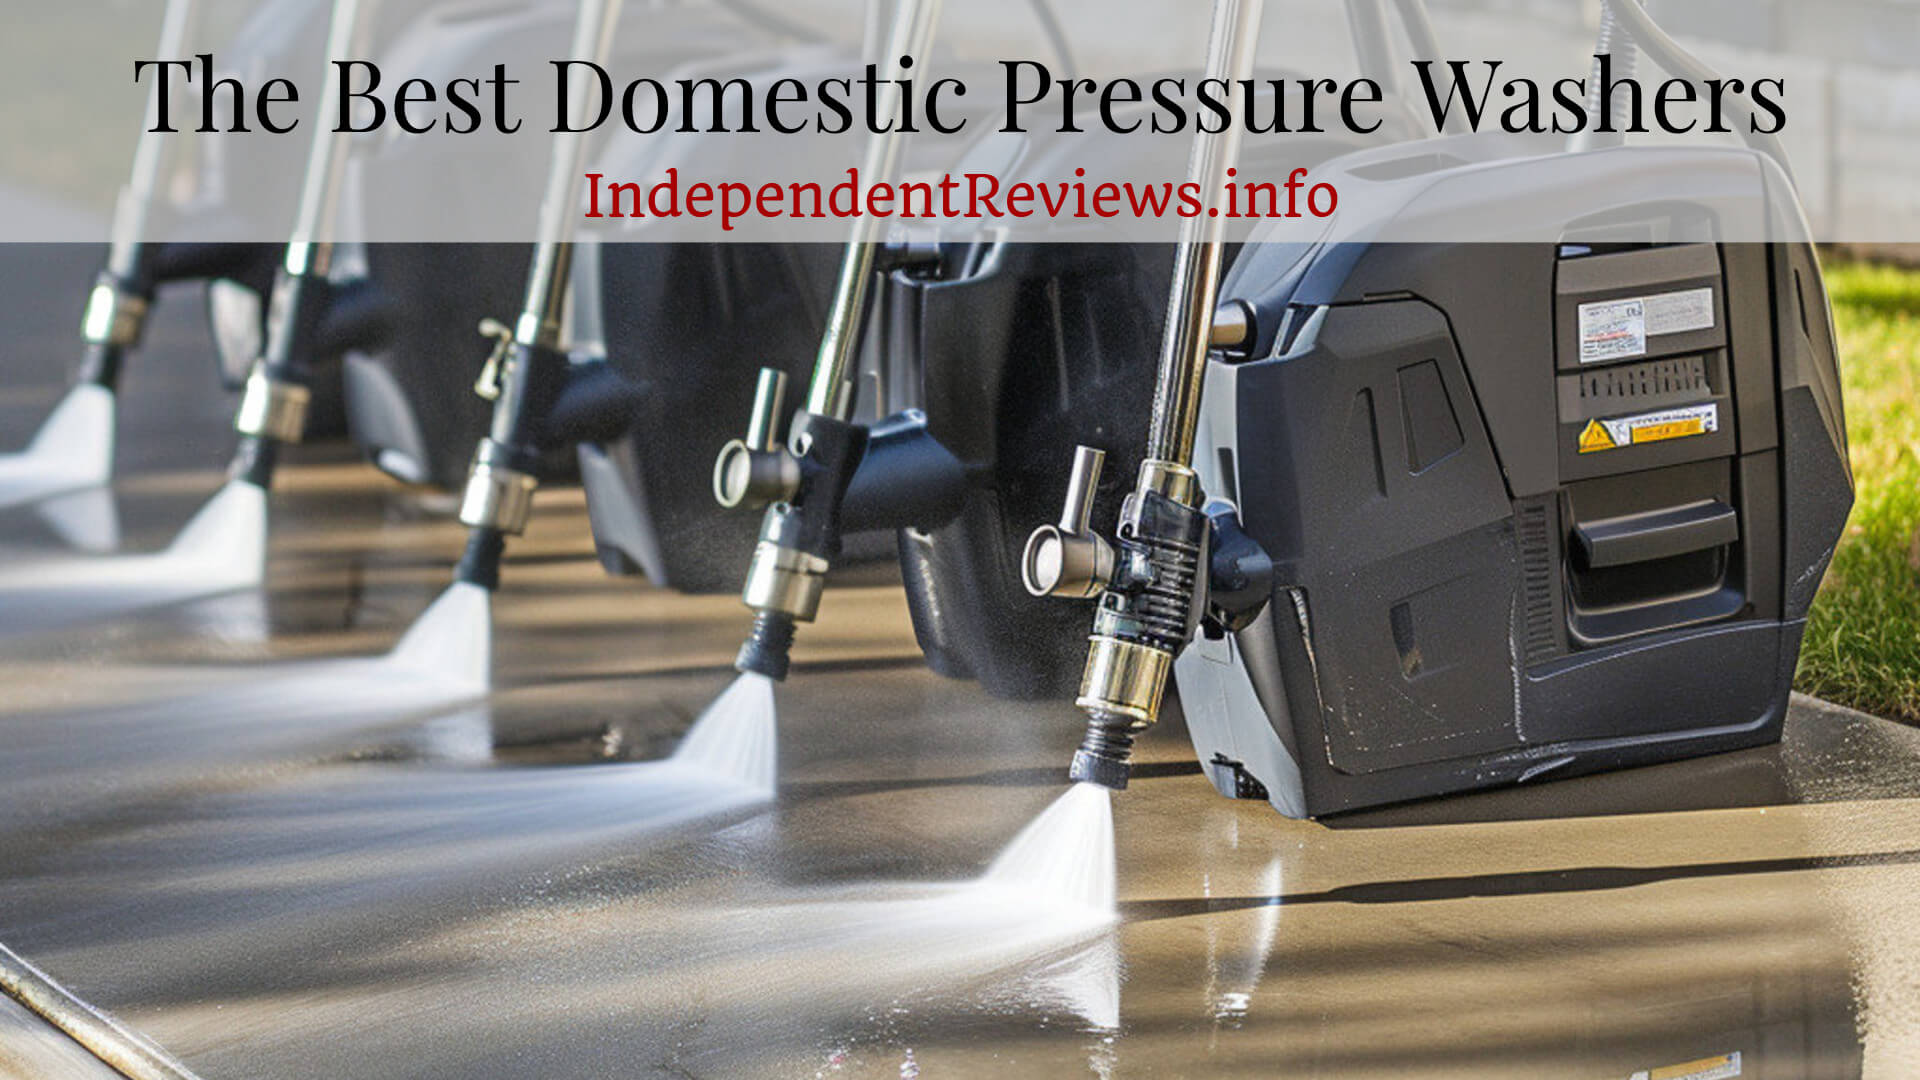 The Best Pressure Washers for Domestic Use